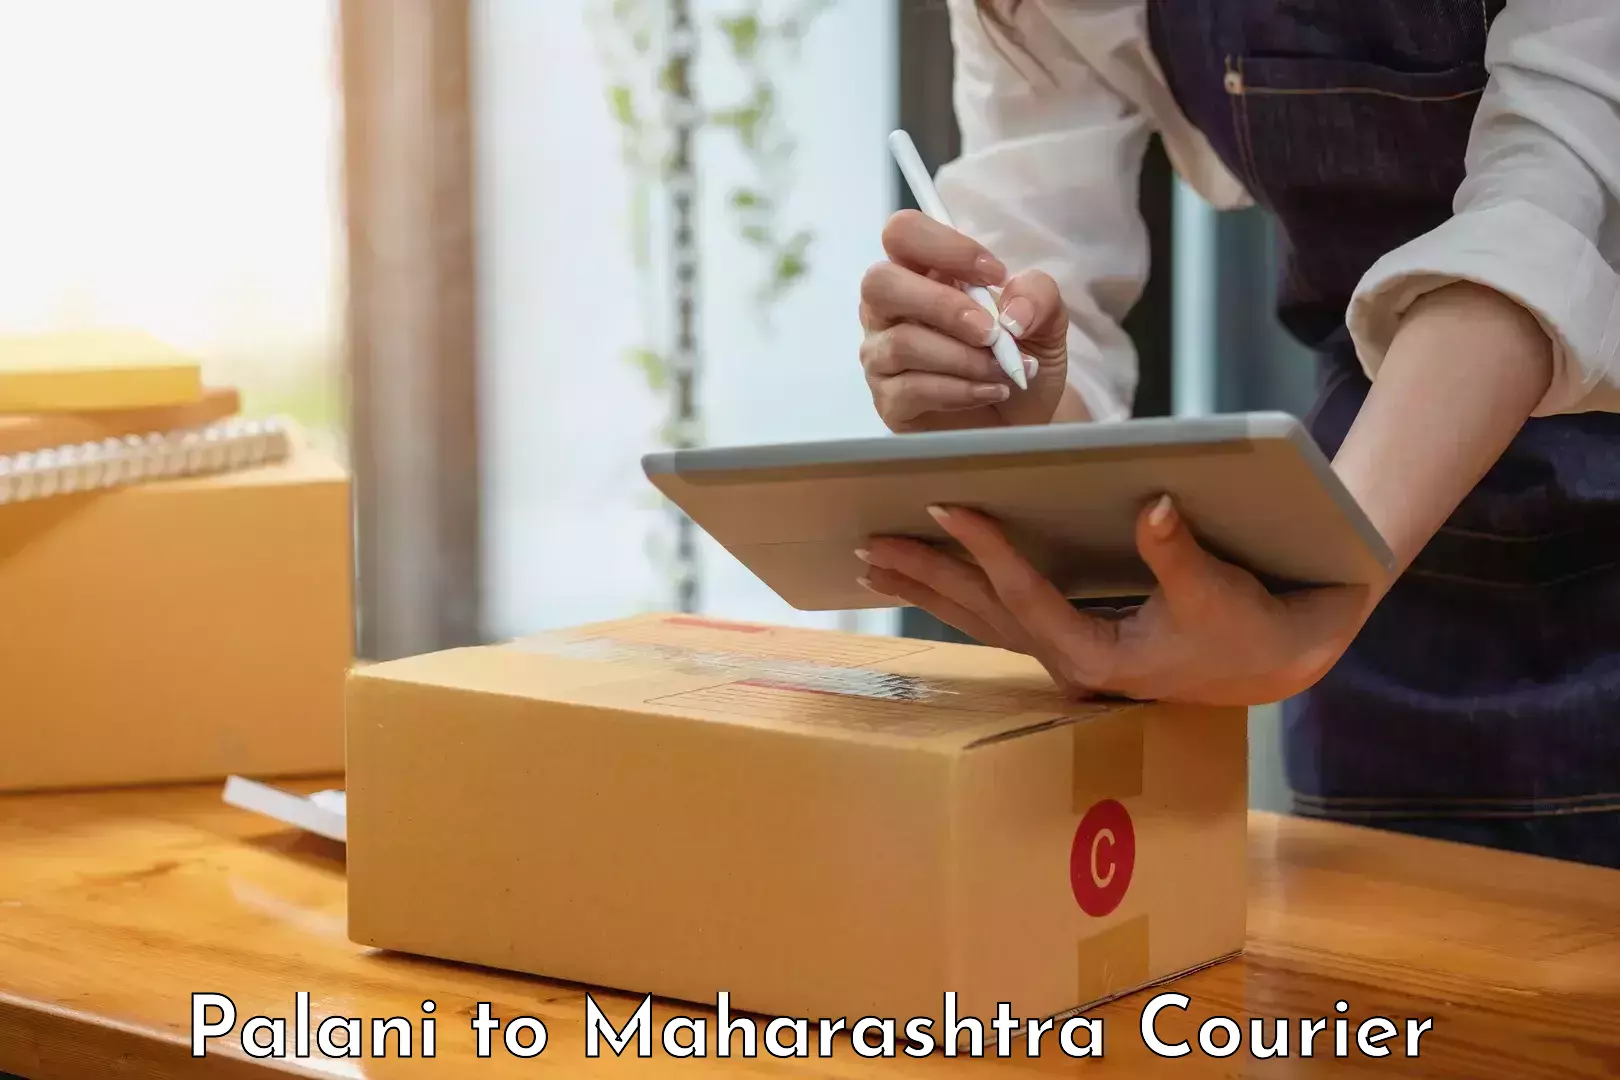 Subscription-based courier Palani to Mantha